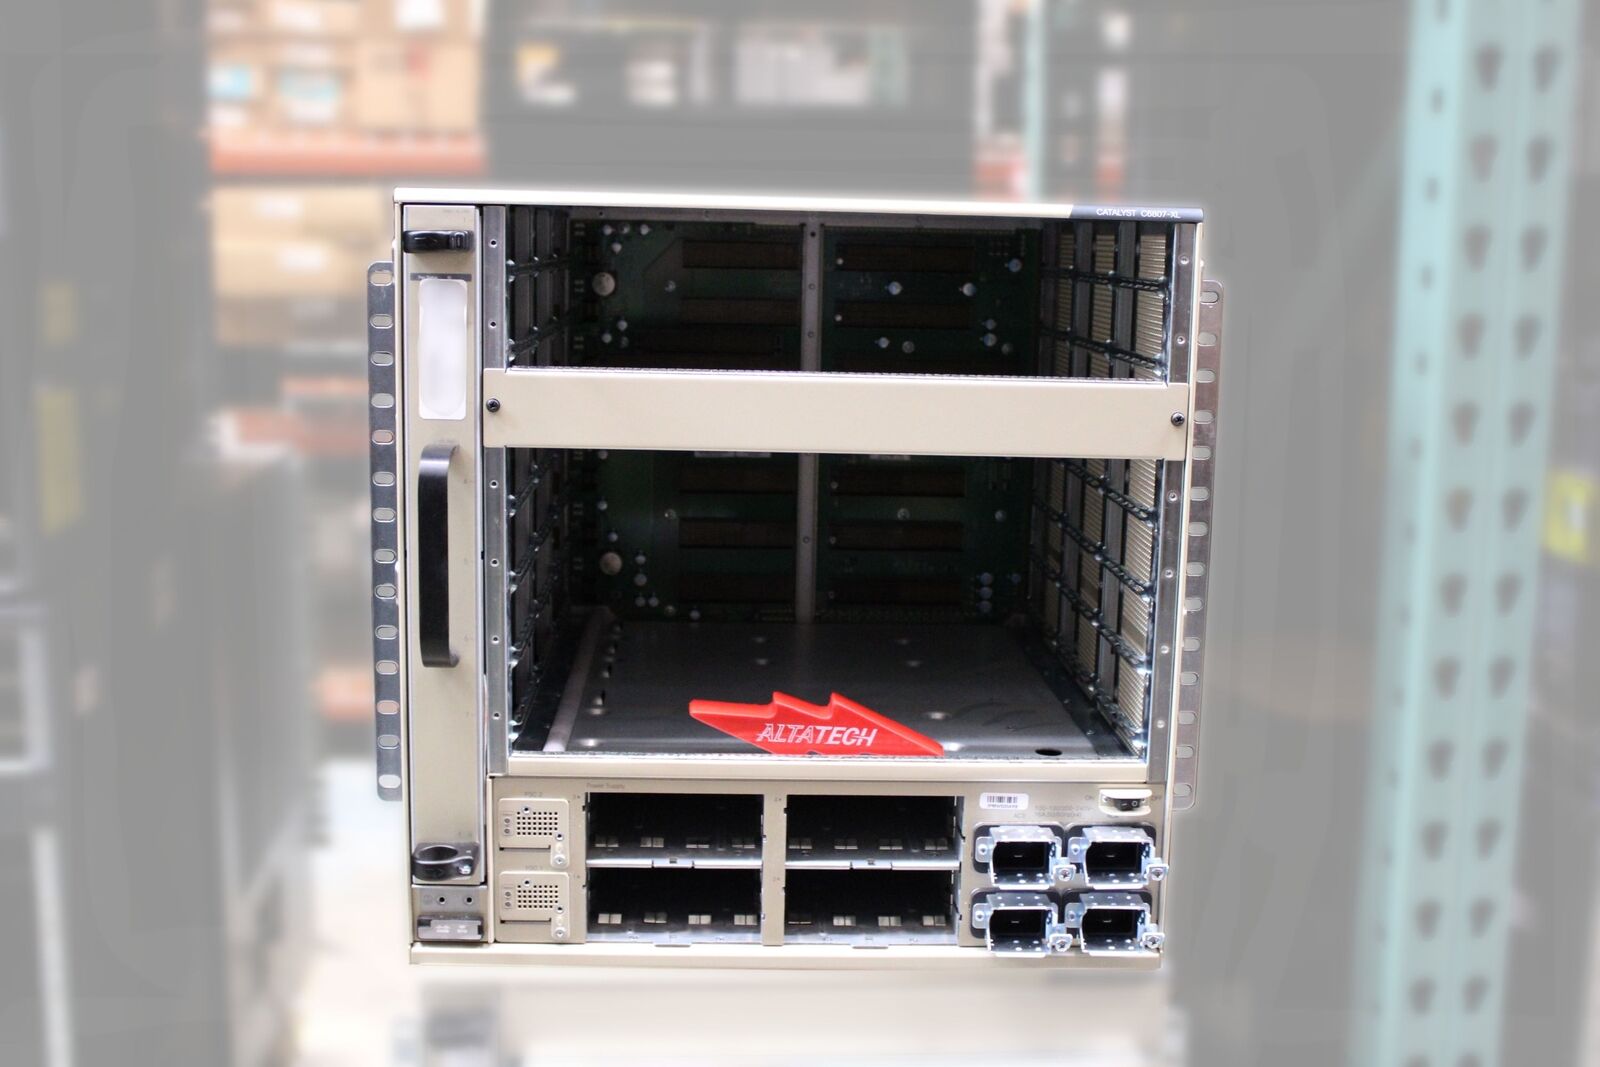 C6807-XL Cisco Catalyst 6800 Switch Chassis